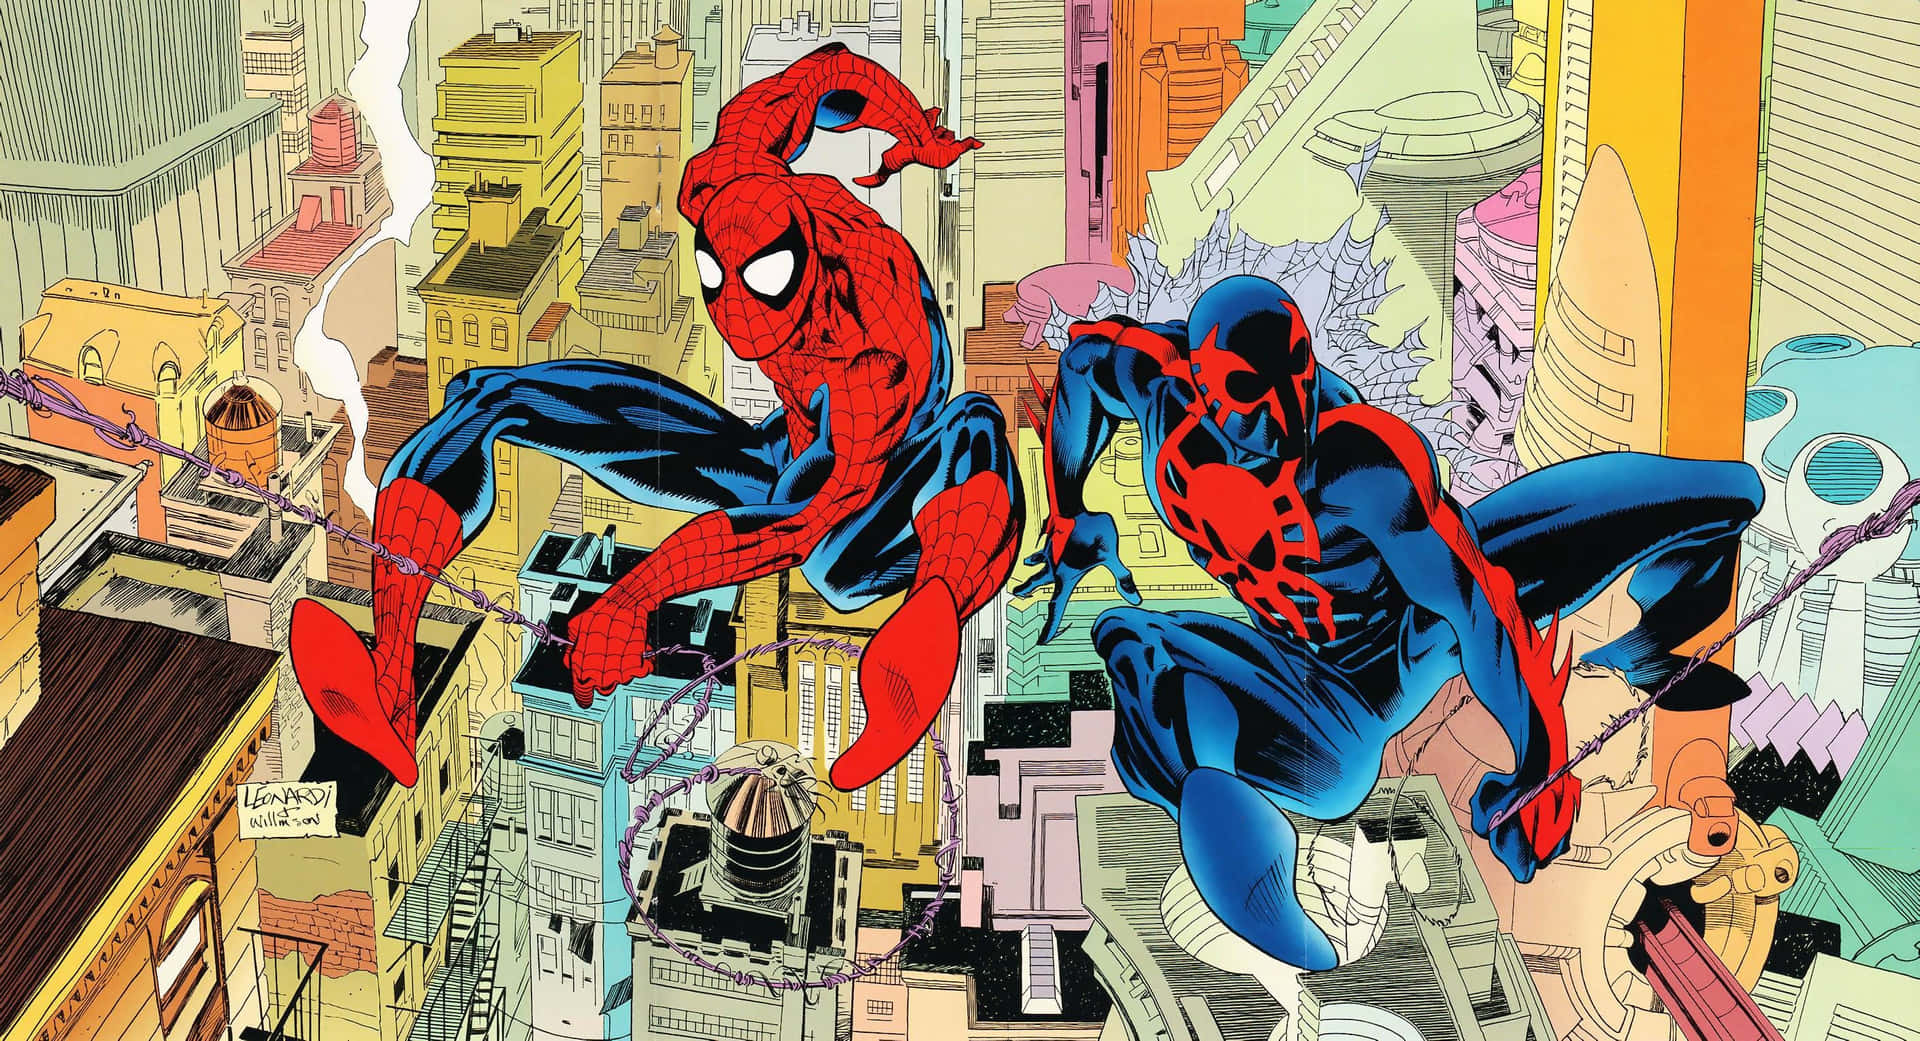 Spider-Man 2099 in an action-packed scene, swinging through the futuristic city Wallpaper